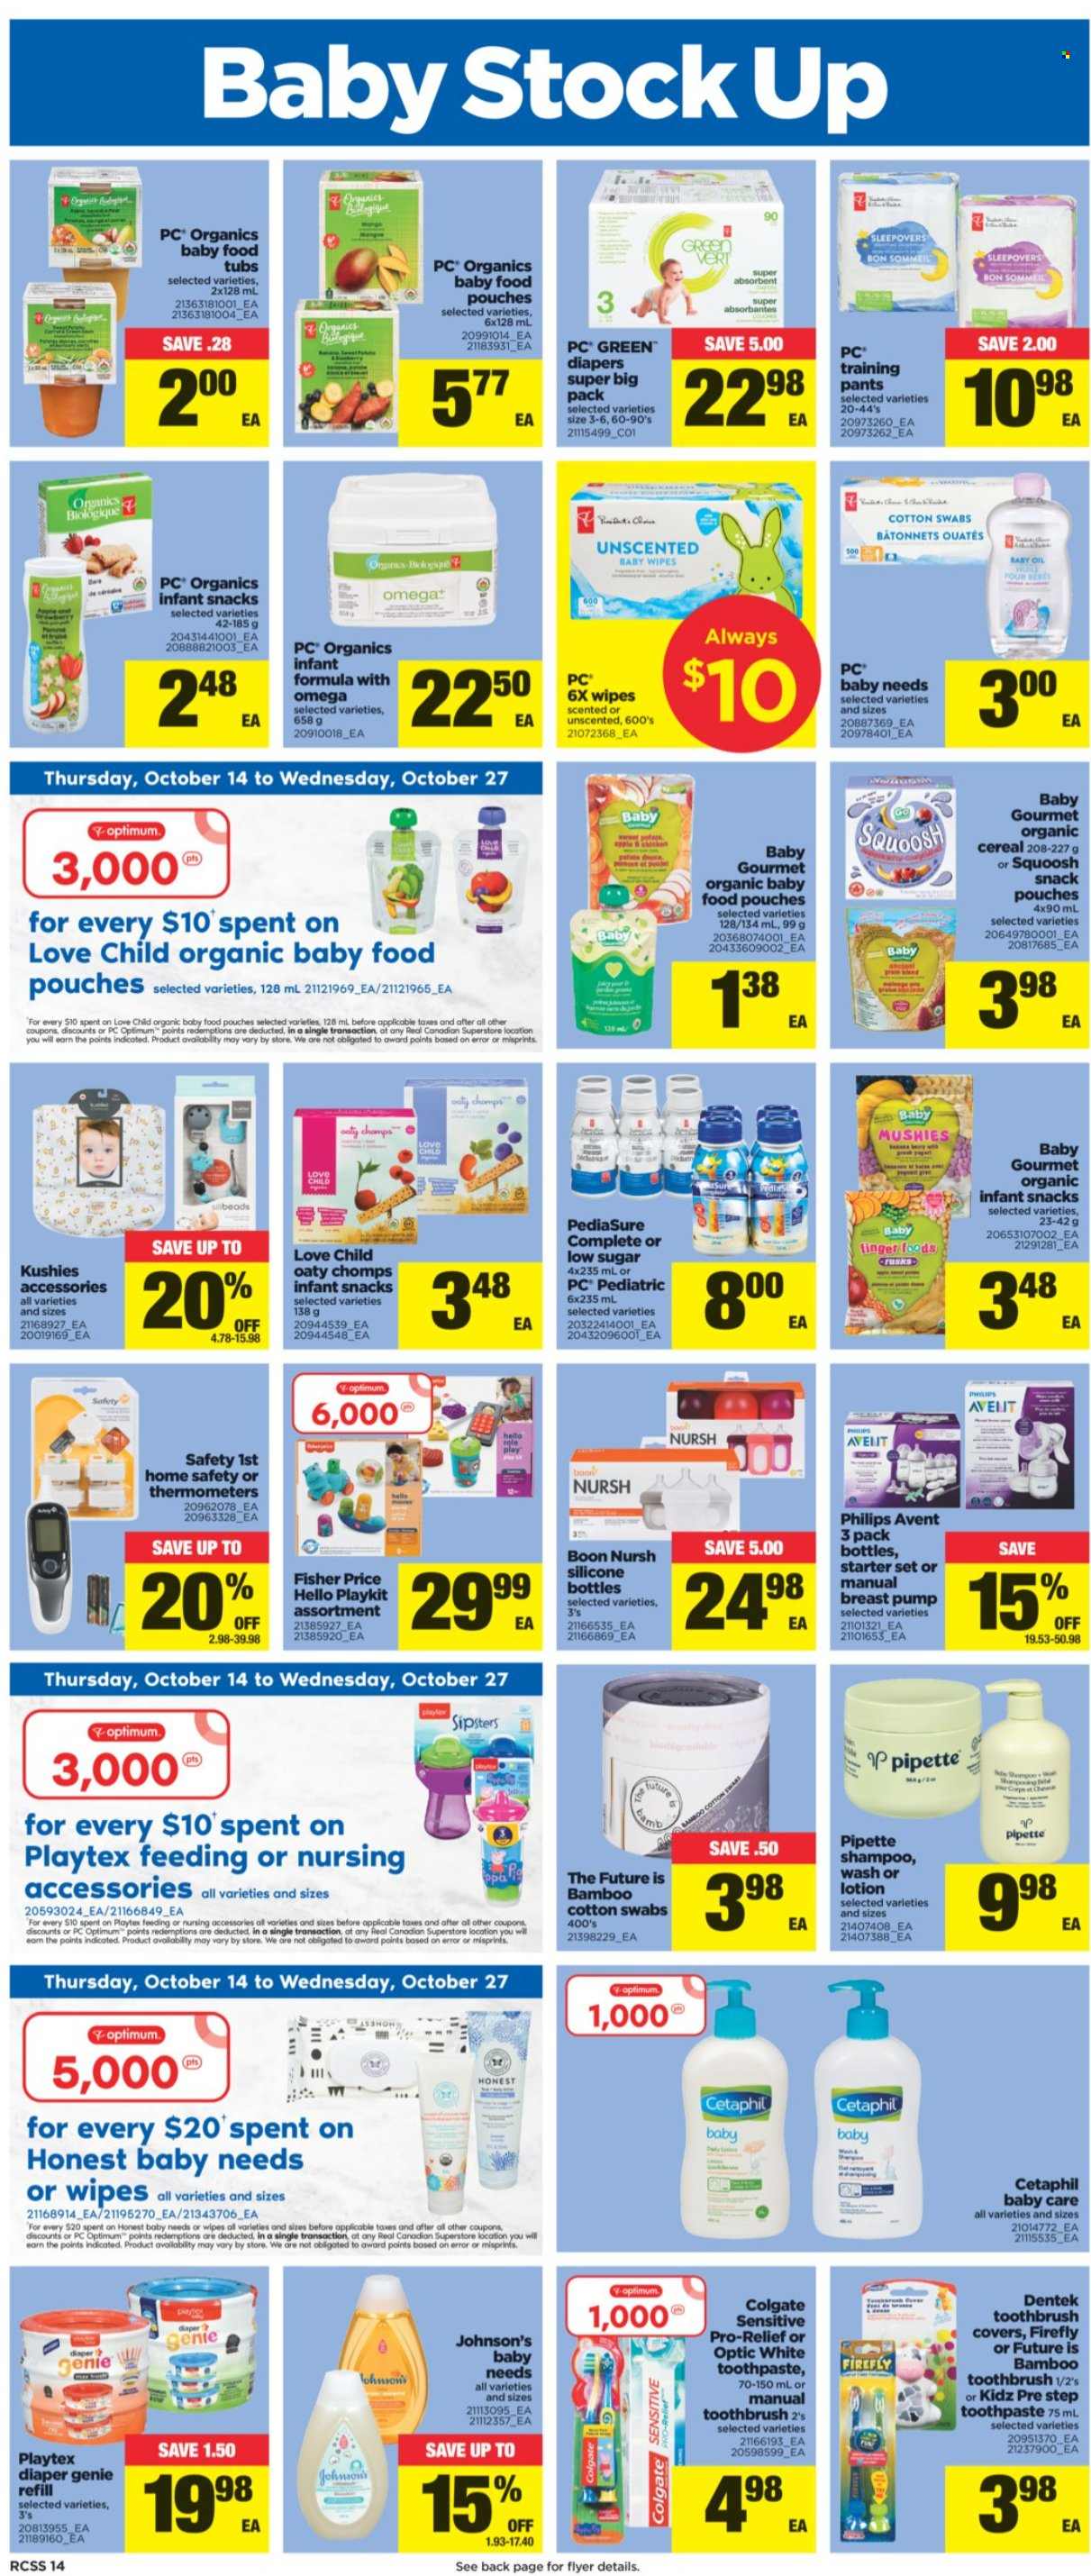 thumbnail - Real Canadian Superstore Flyer - October 14, 2021 - October 20, 2021 - Sales products - Philips, rusks, snack, cereals, oil, organic baby food, wipes, pants, baby wipes, nappies, Johnson's, baby pants, toothbrush, toothpaste, Playtex, body lotion, Optimum, breast pump, Philips Avent, pump, safety 1st, Colgate, shampoo. Page 14.